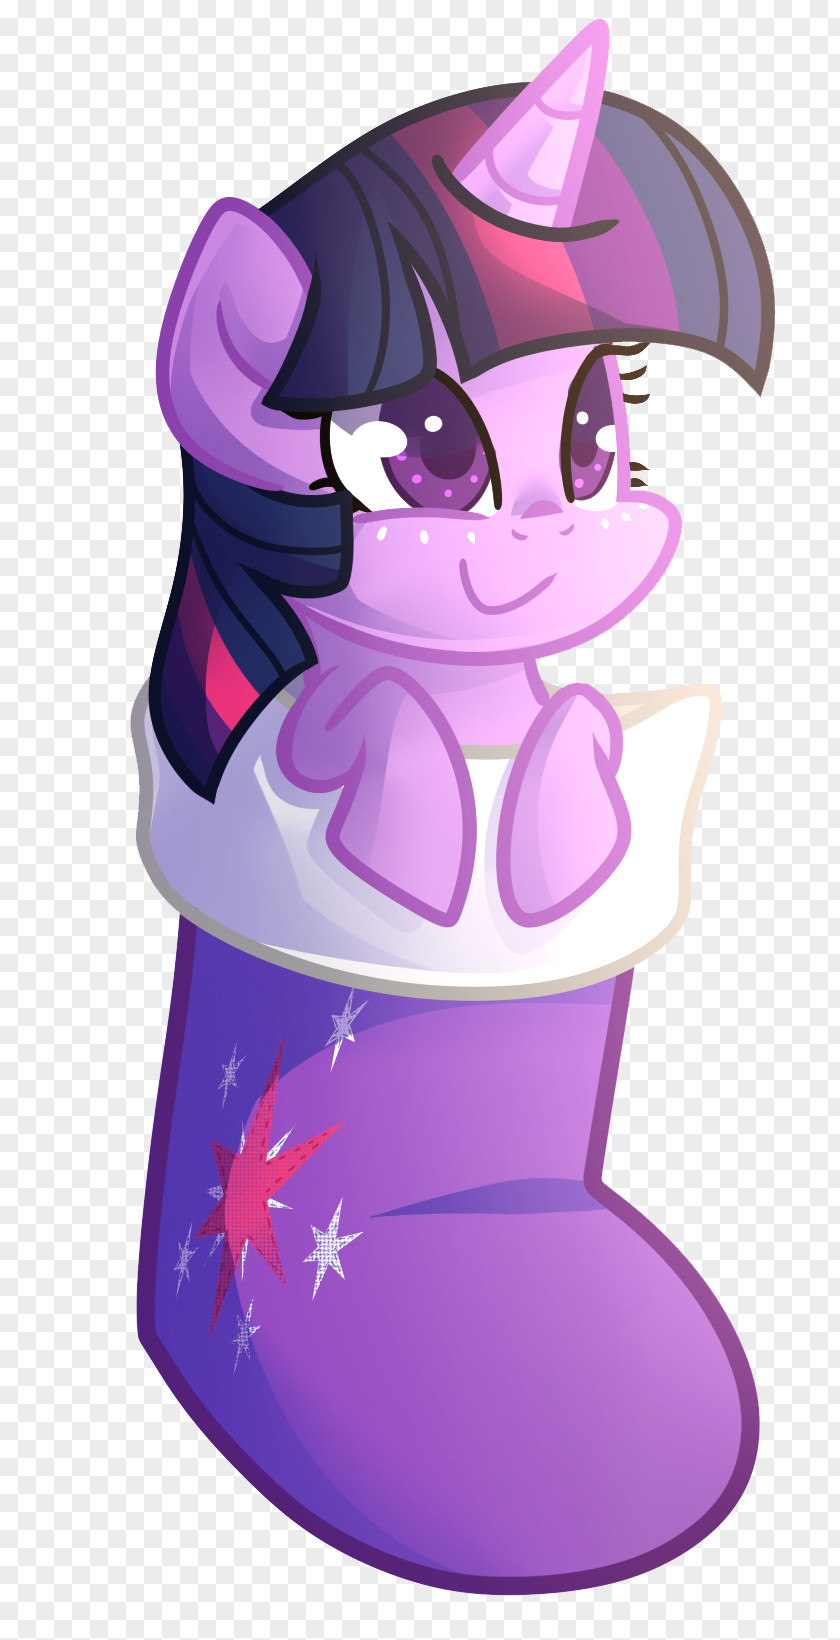 Shimmering Twilight Sparkle Pinkie Pie Pony Derpy Hooves Rarity PNG